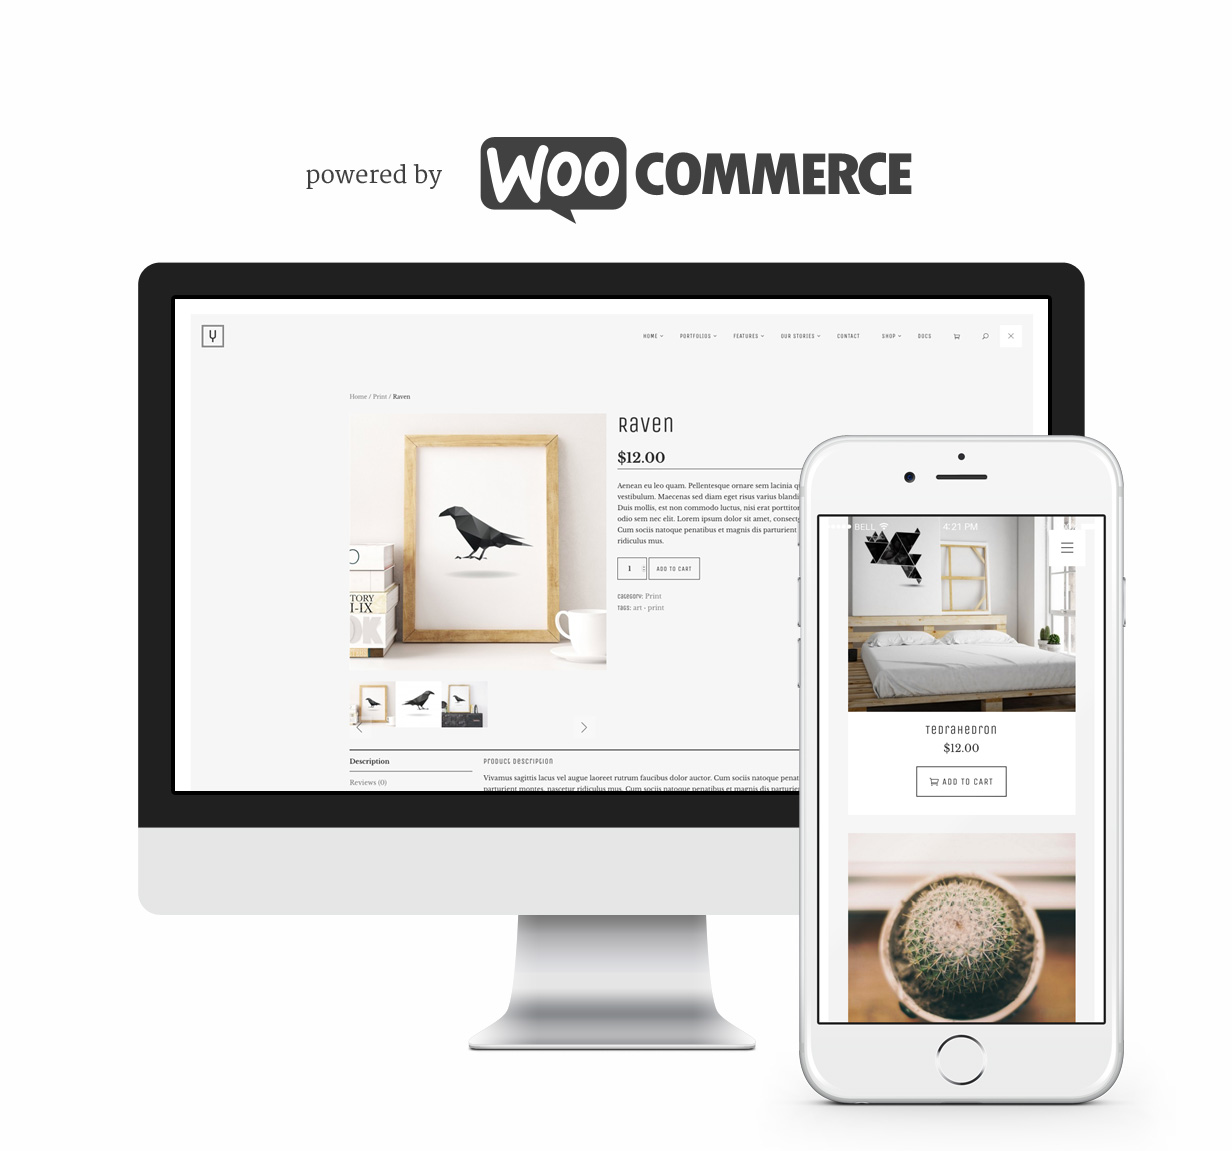 Powered by WooCommerce.